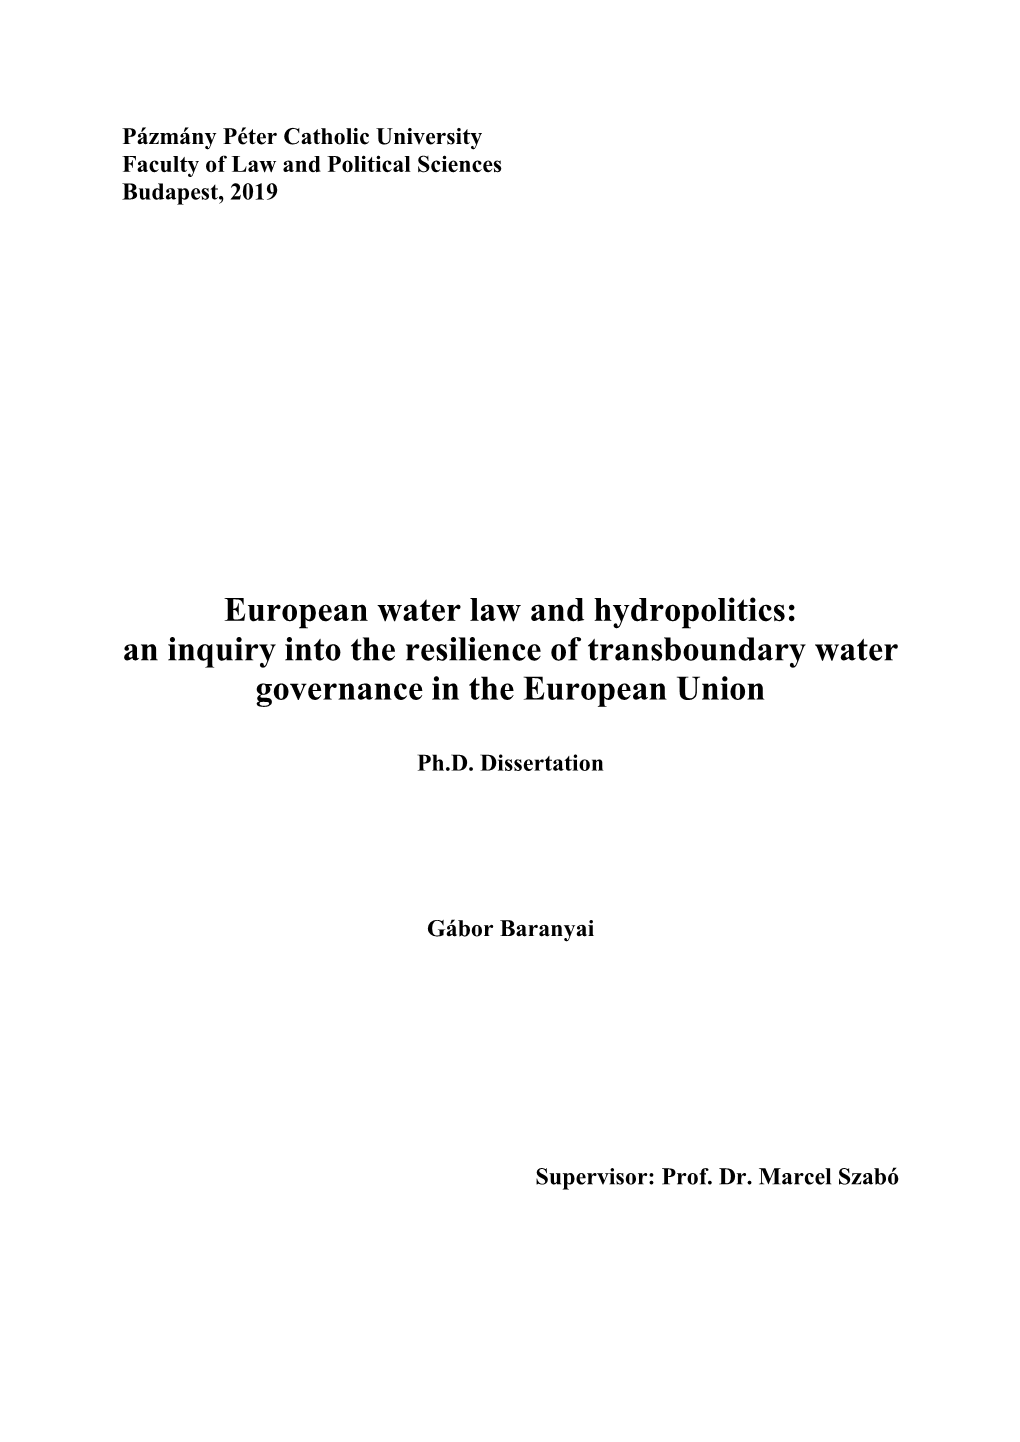 European Water Law and Hydropolitics: an Inquiry Into the Resilience of Transboundary Water Governance in the European Union